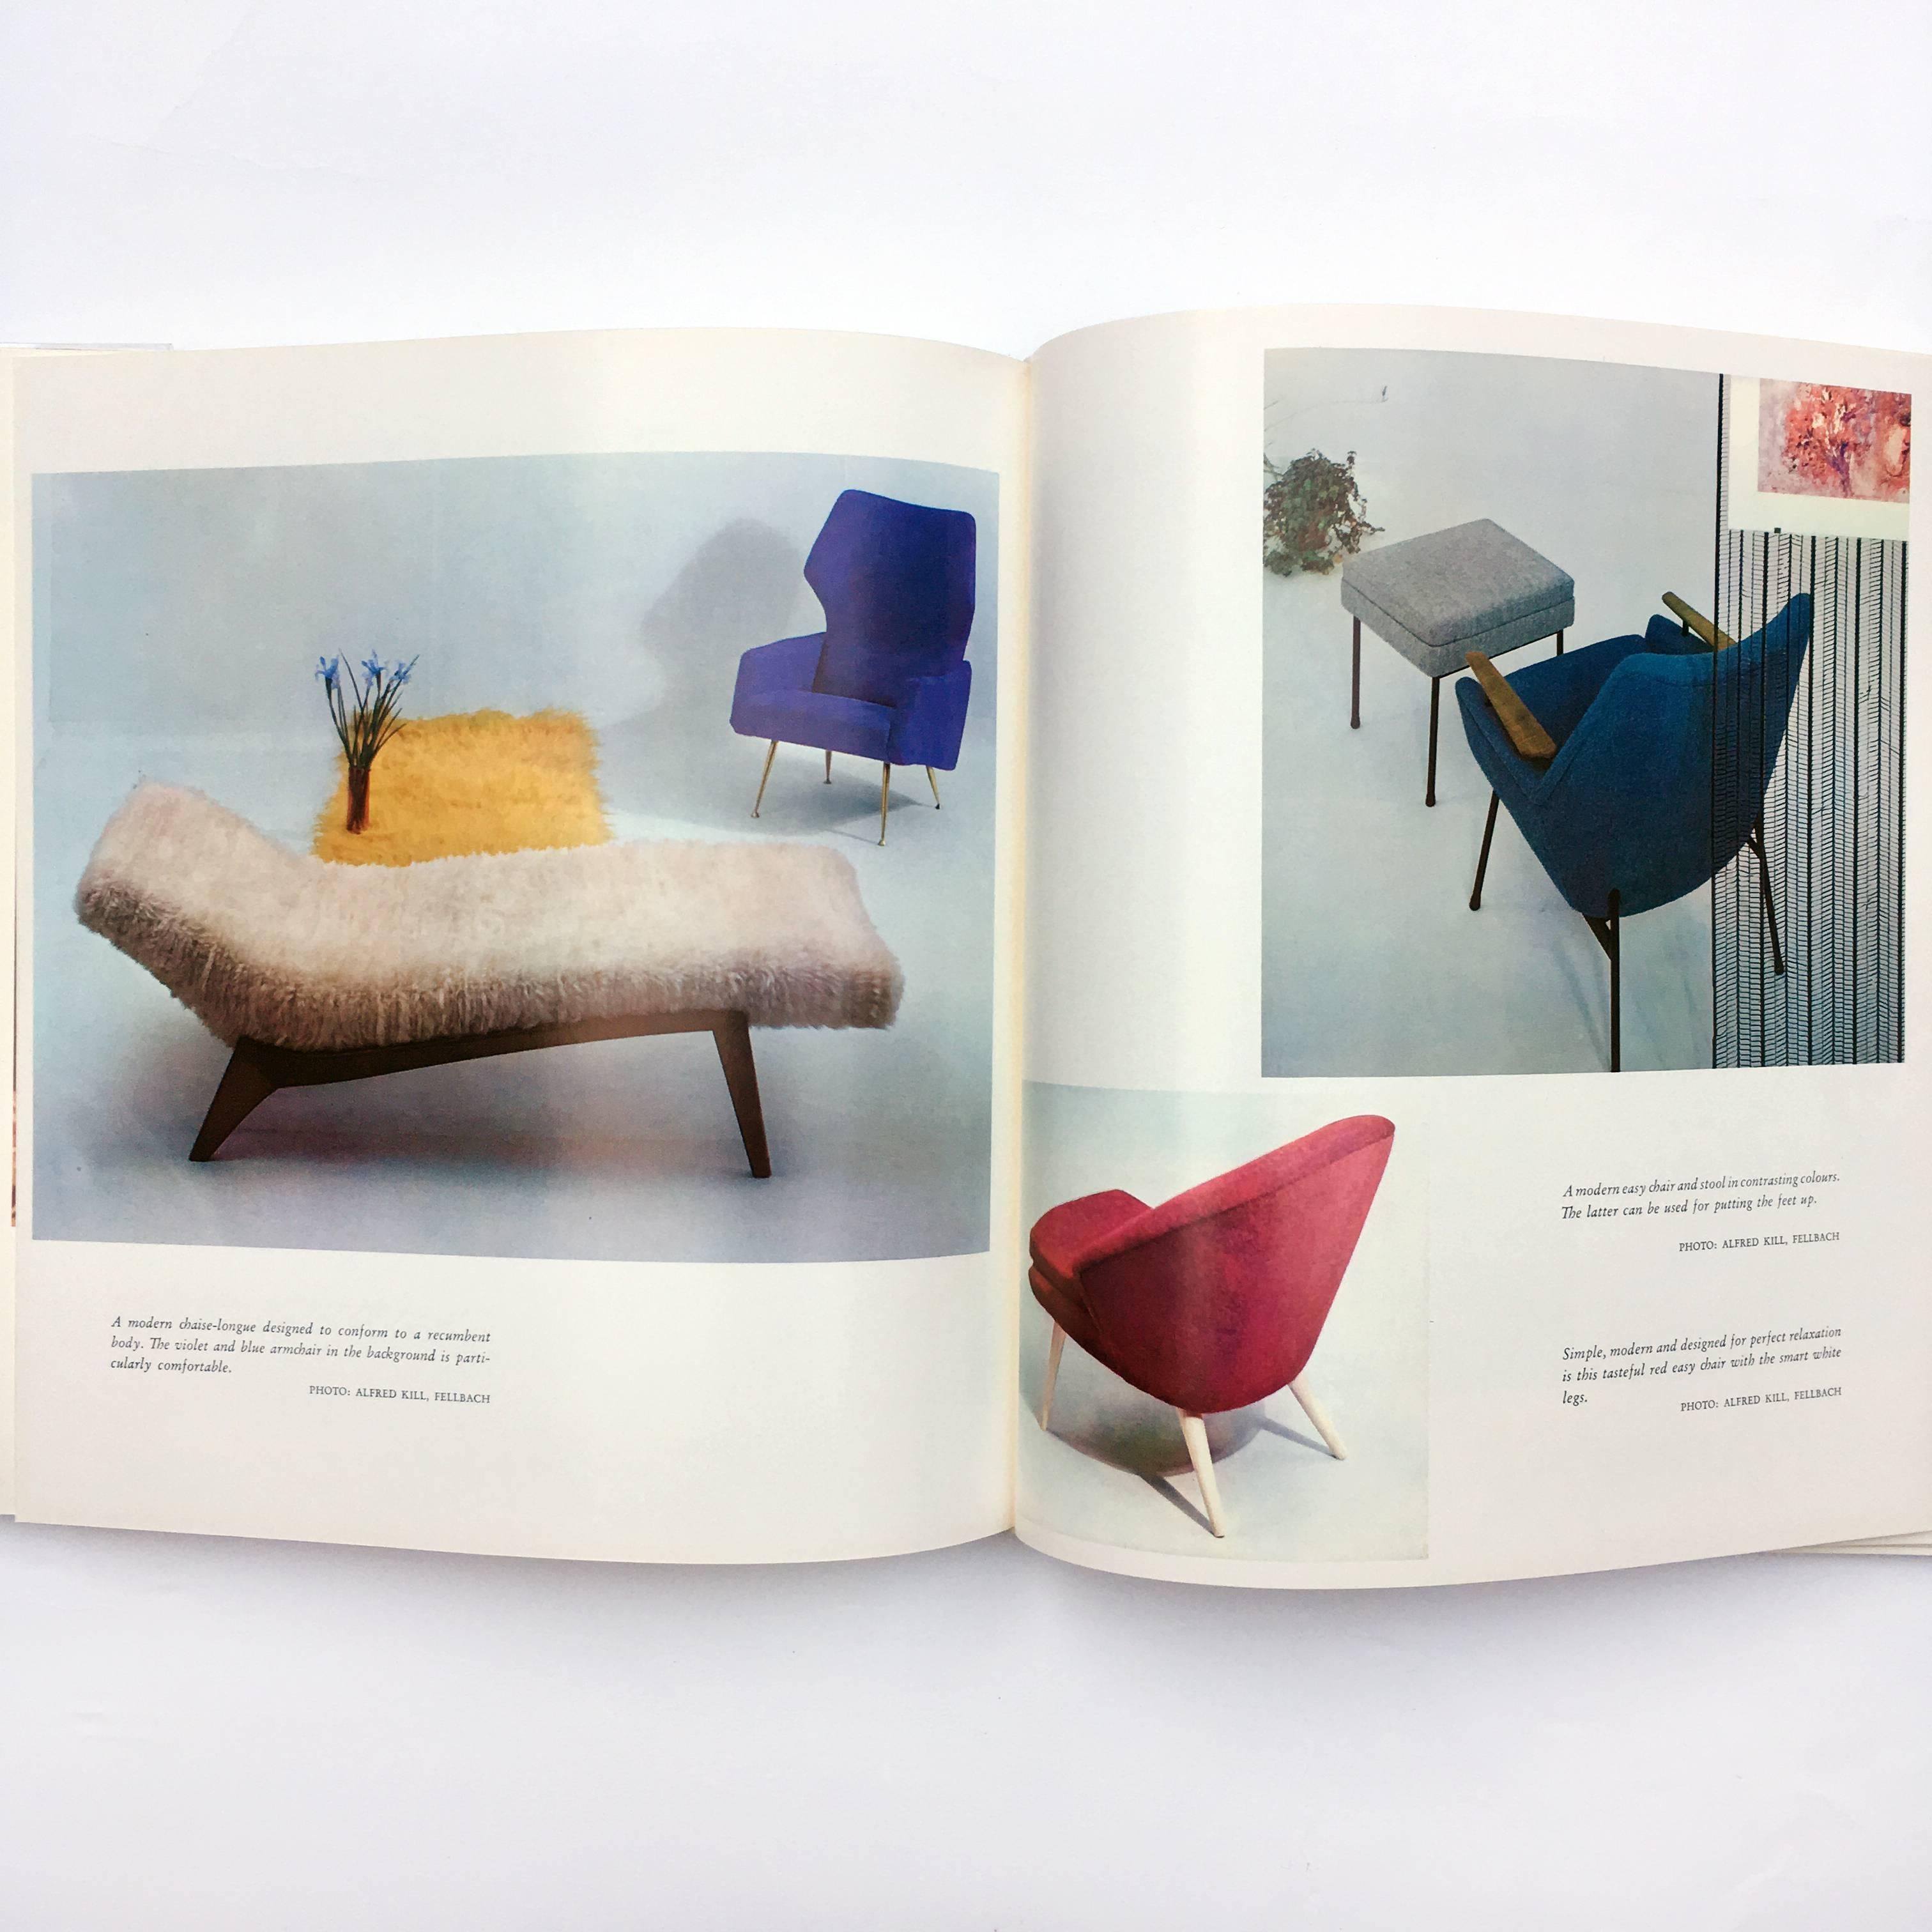 Interiors for Contemporary Living 1st Edition, 1960 In Fair Condition In London, GB